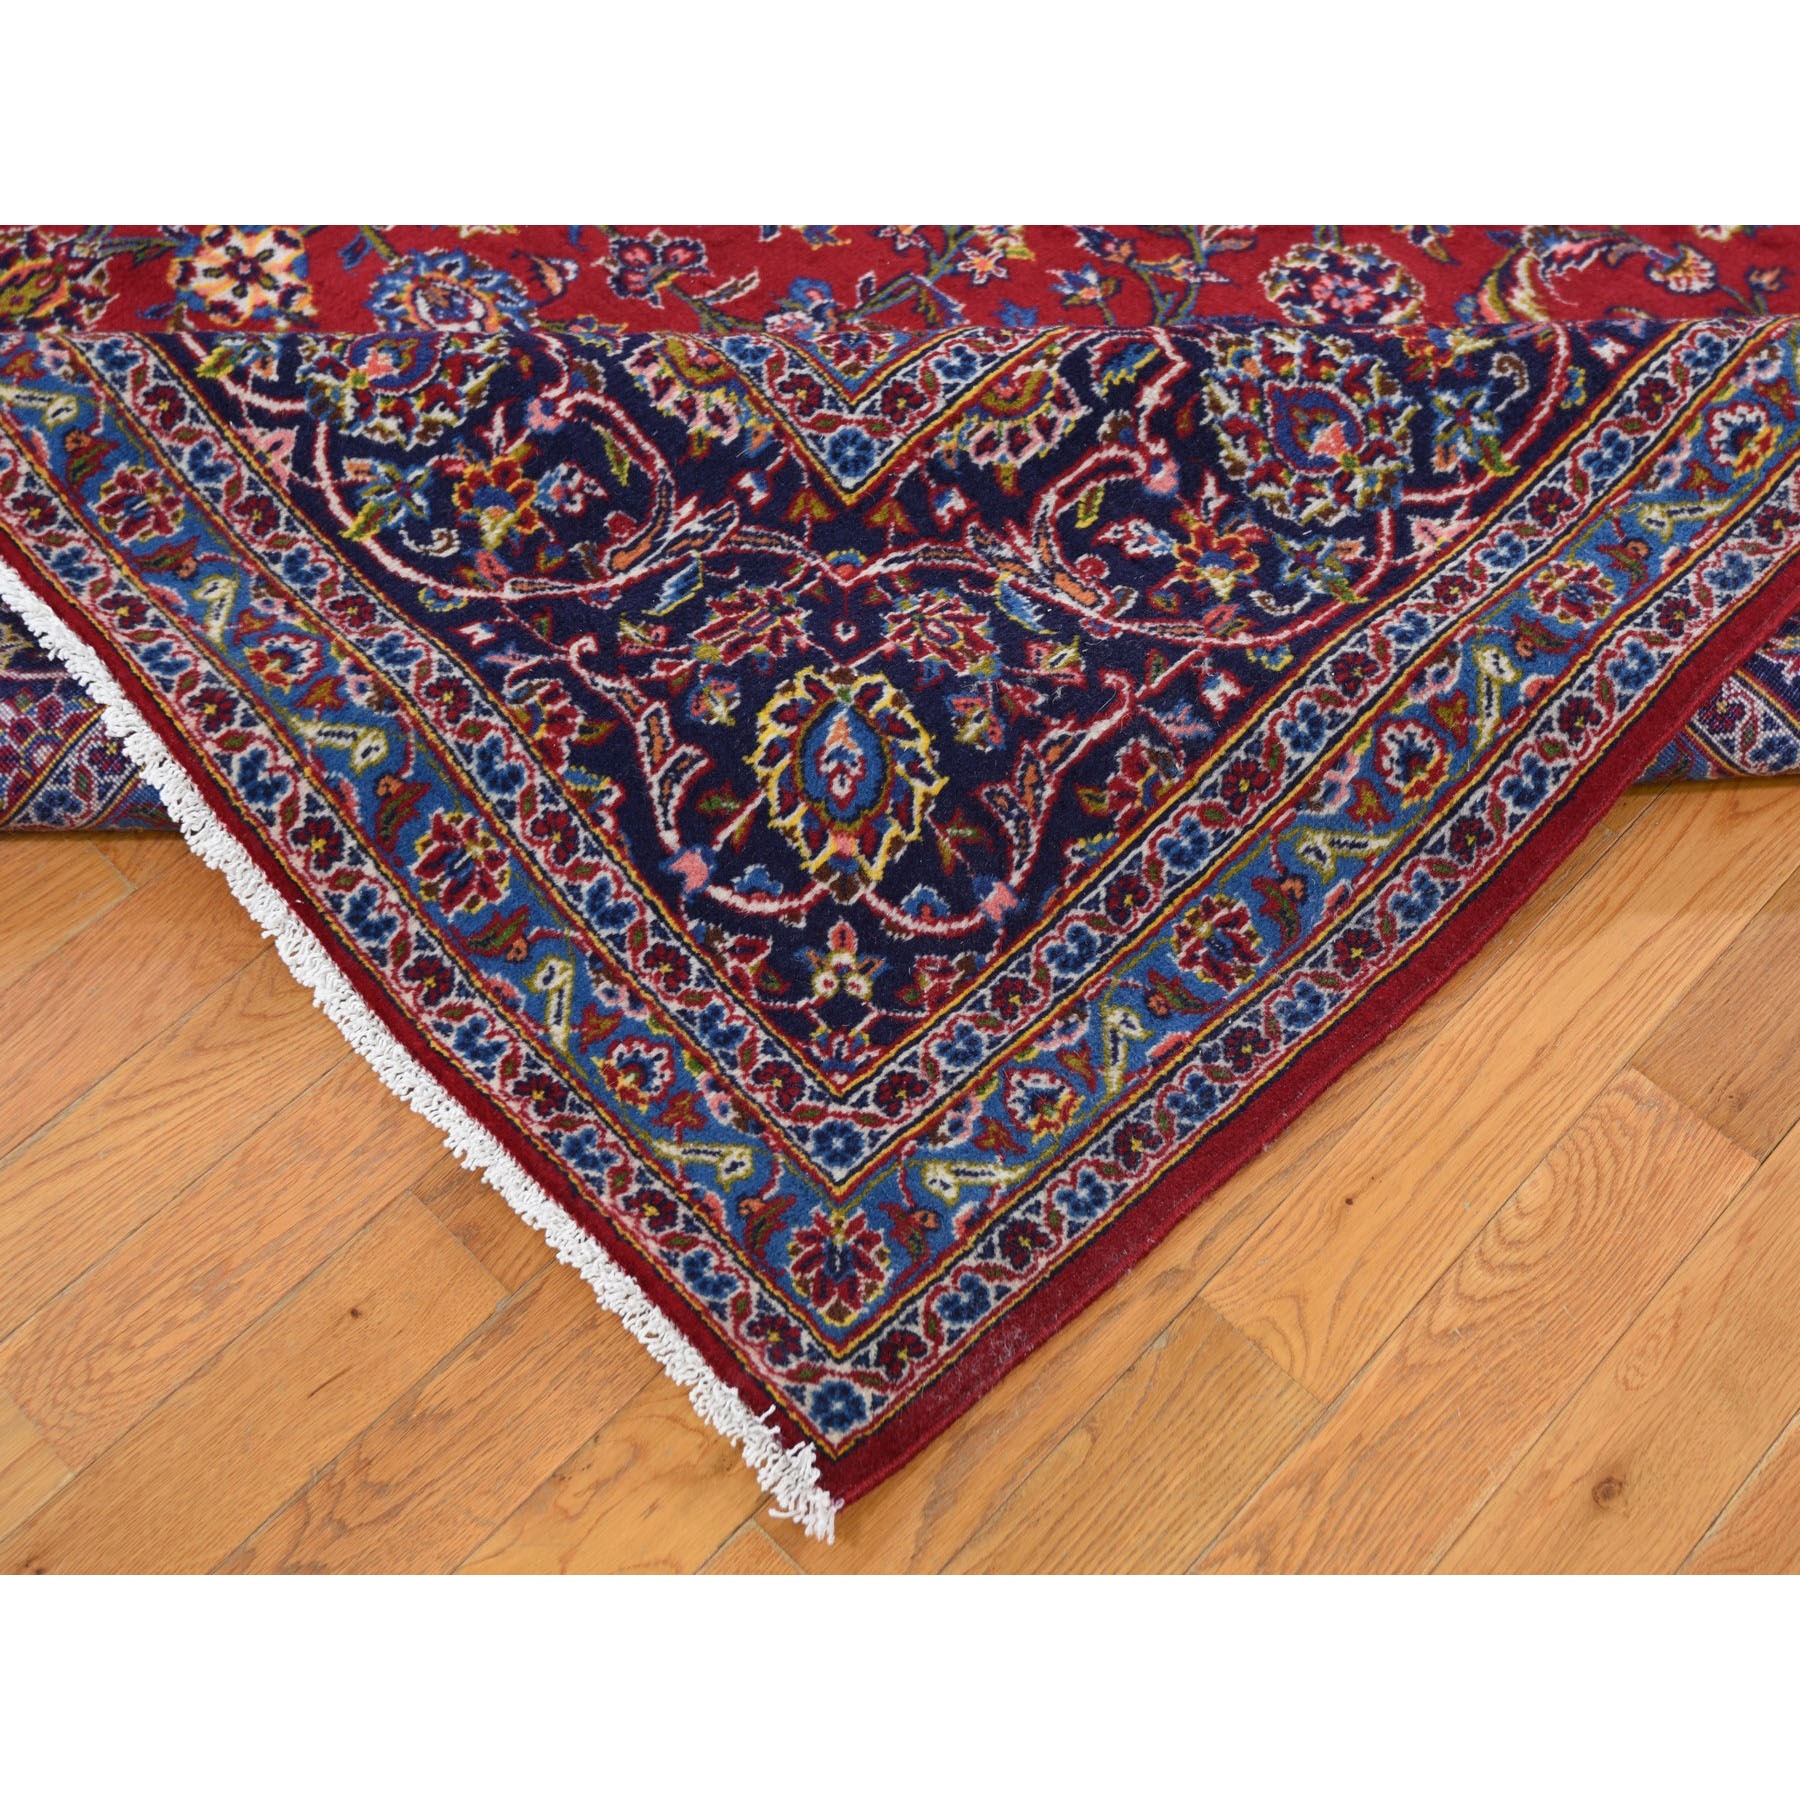 9-10 x13-4  Red Semi Antique Persian Kashan Full Pile Pure Wool Hand Knotted Oriental Rug 